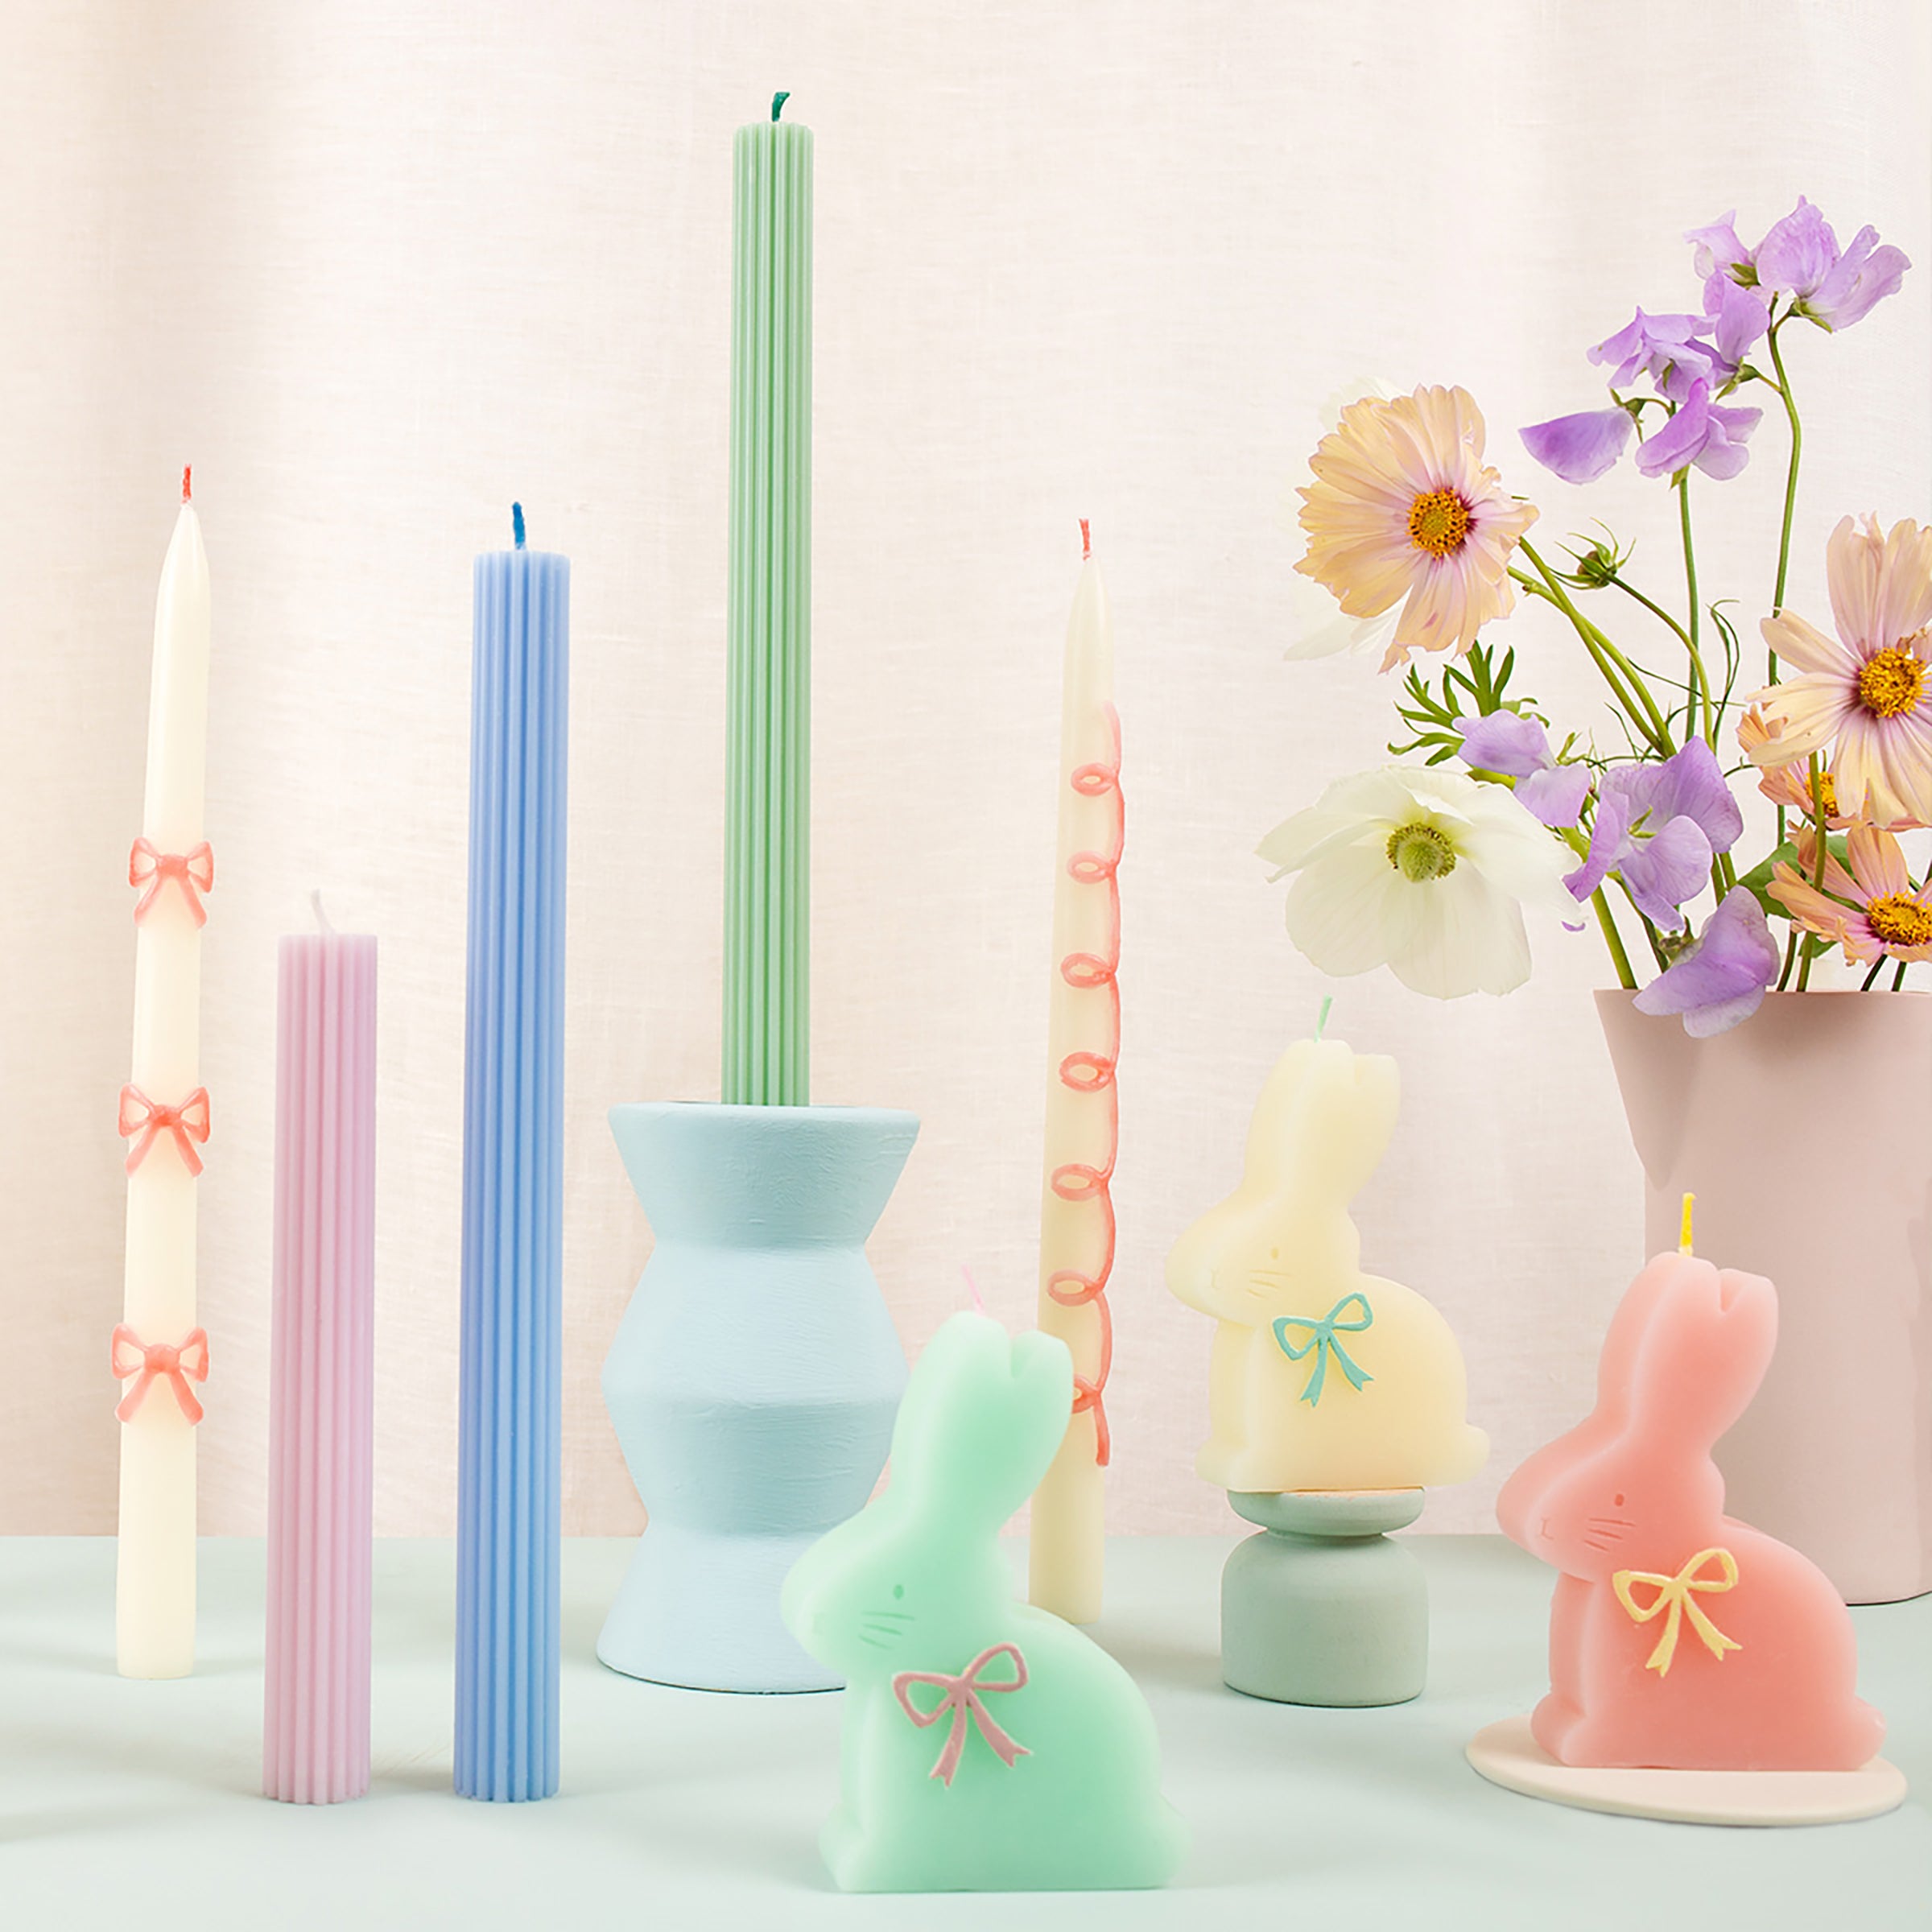 Our party candles feature handpainted pink bows and pretty pink wicks.